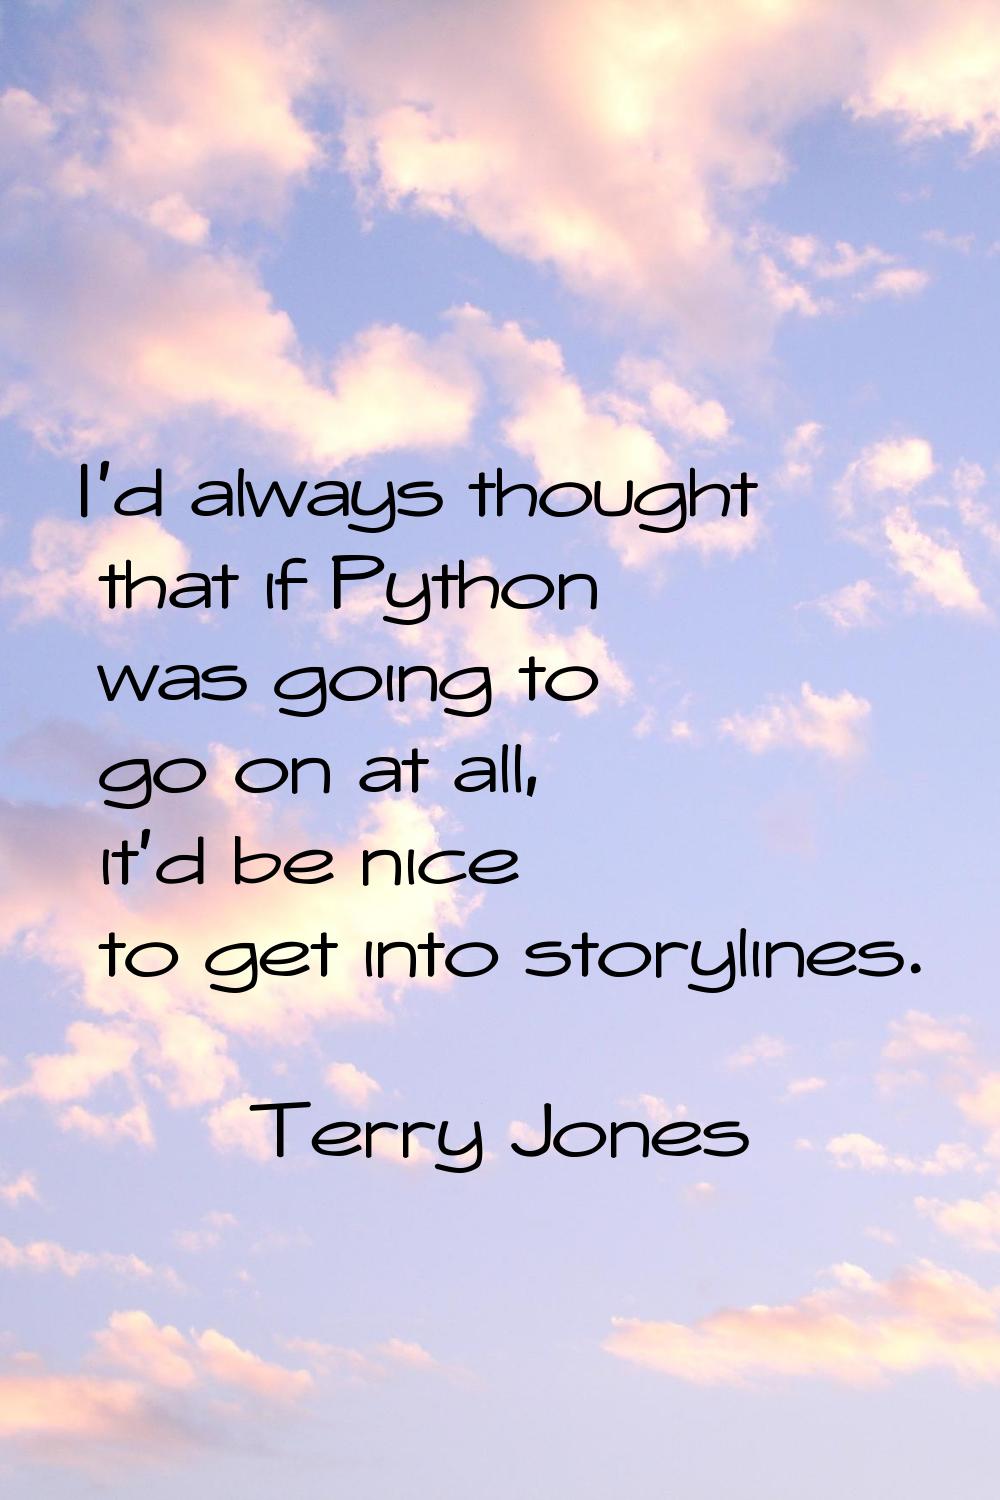 I'd always thought that if Python was going to go on at all, it'd be nice to get into storylines.